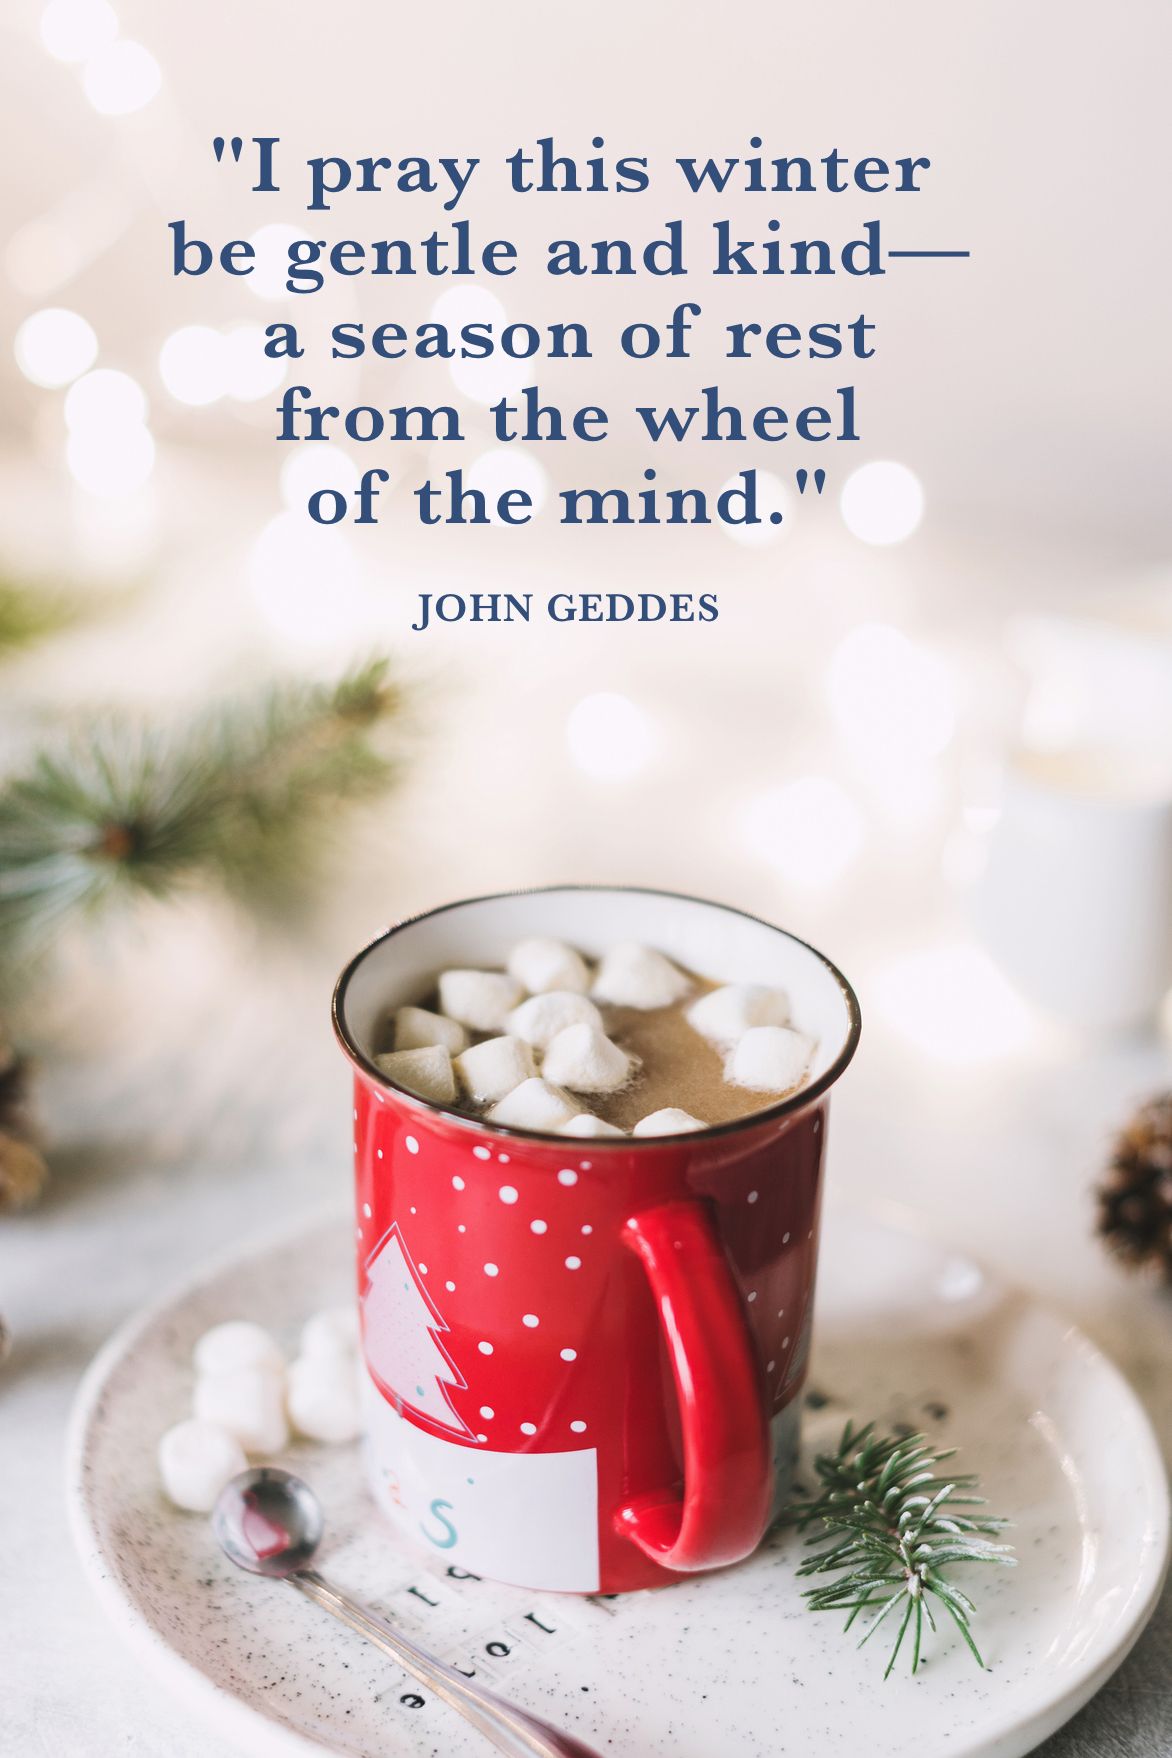 55 Best Winter Quotes: Sayings That Capture the Season